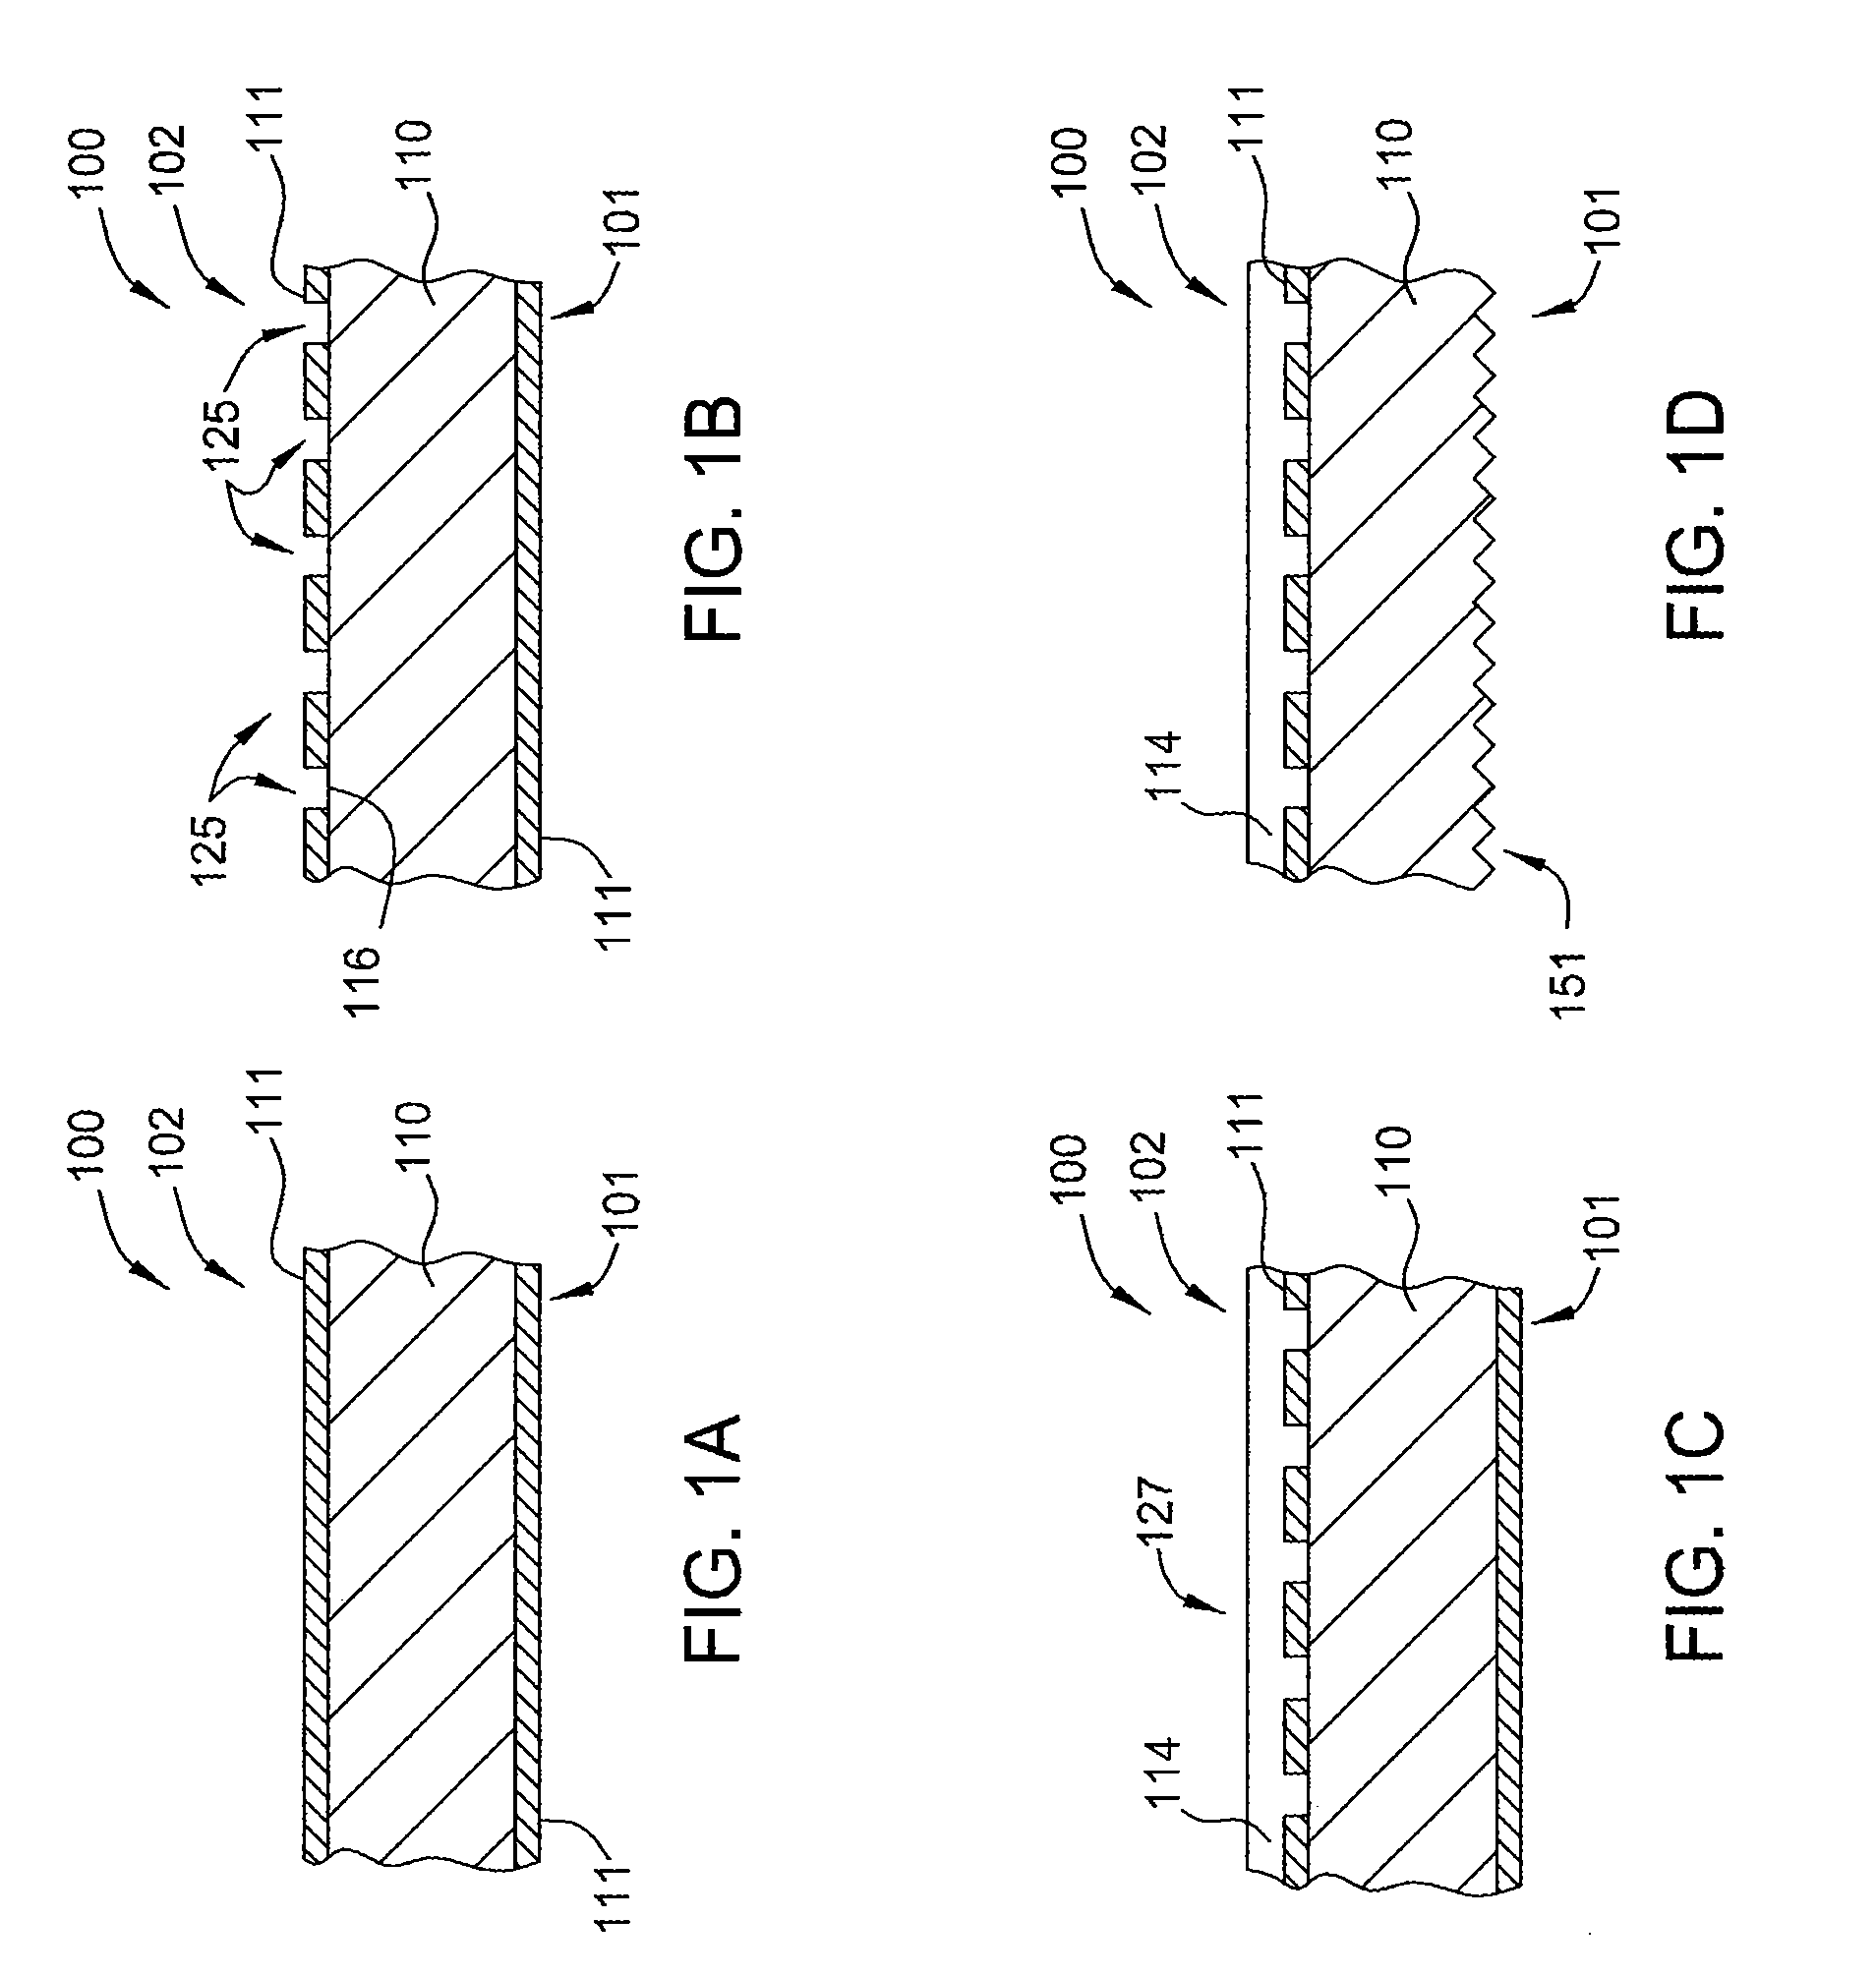 Hybrid heterojunction solar cell fabrication using a metal layer mask